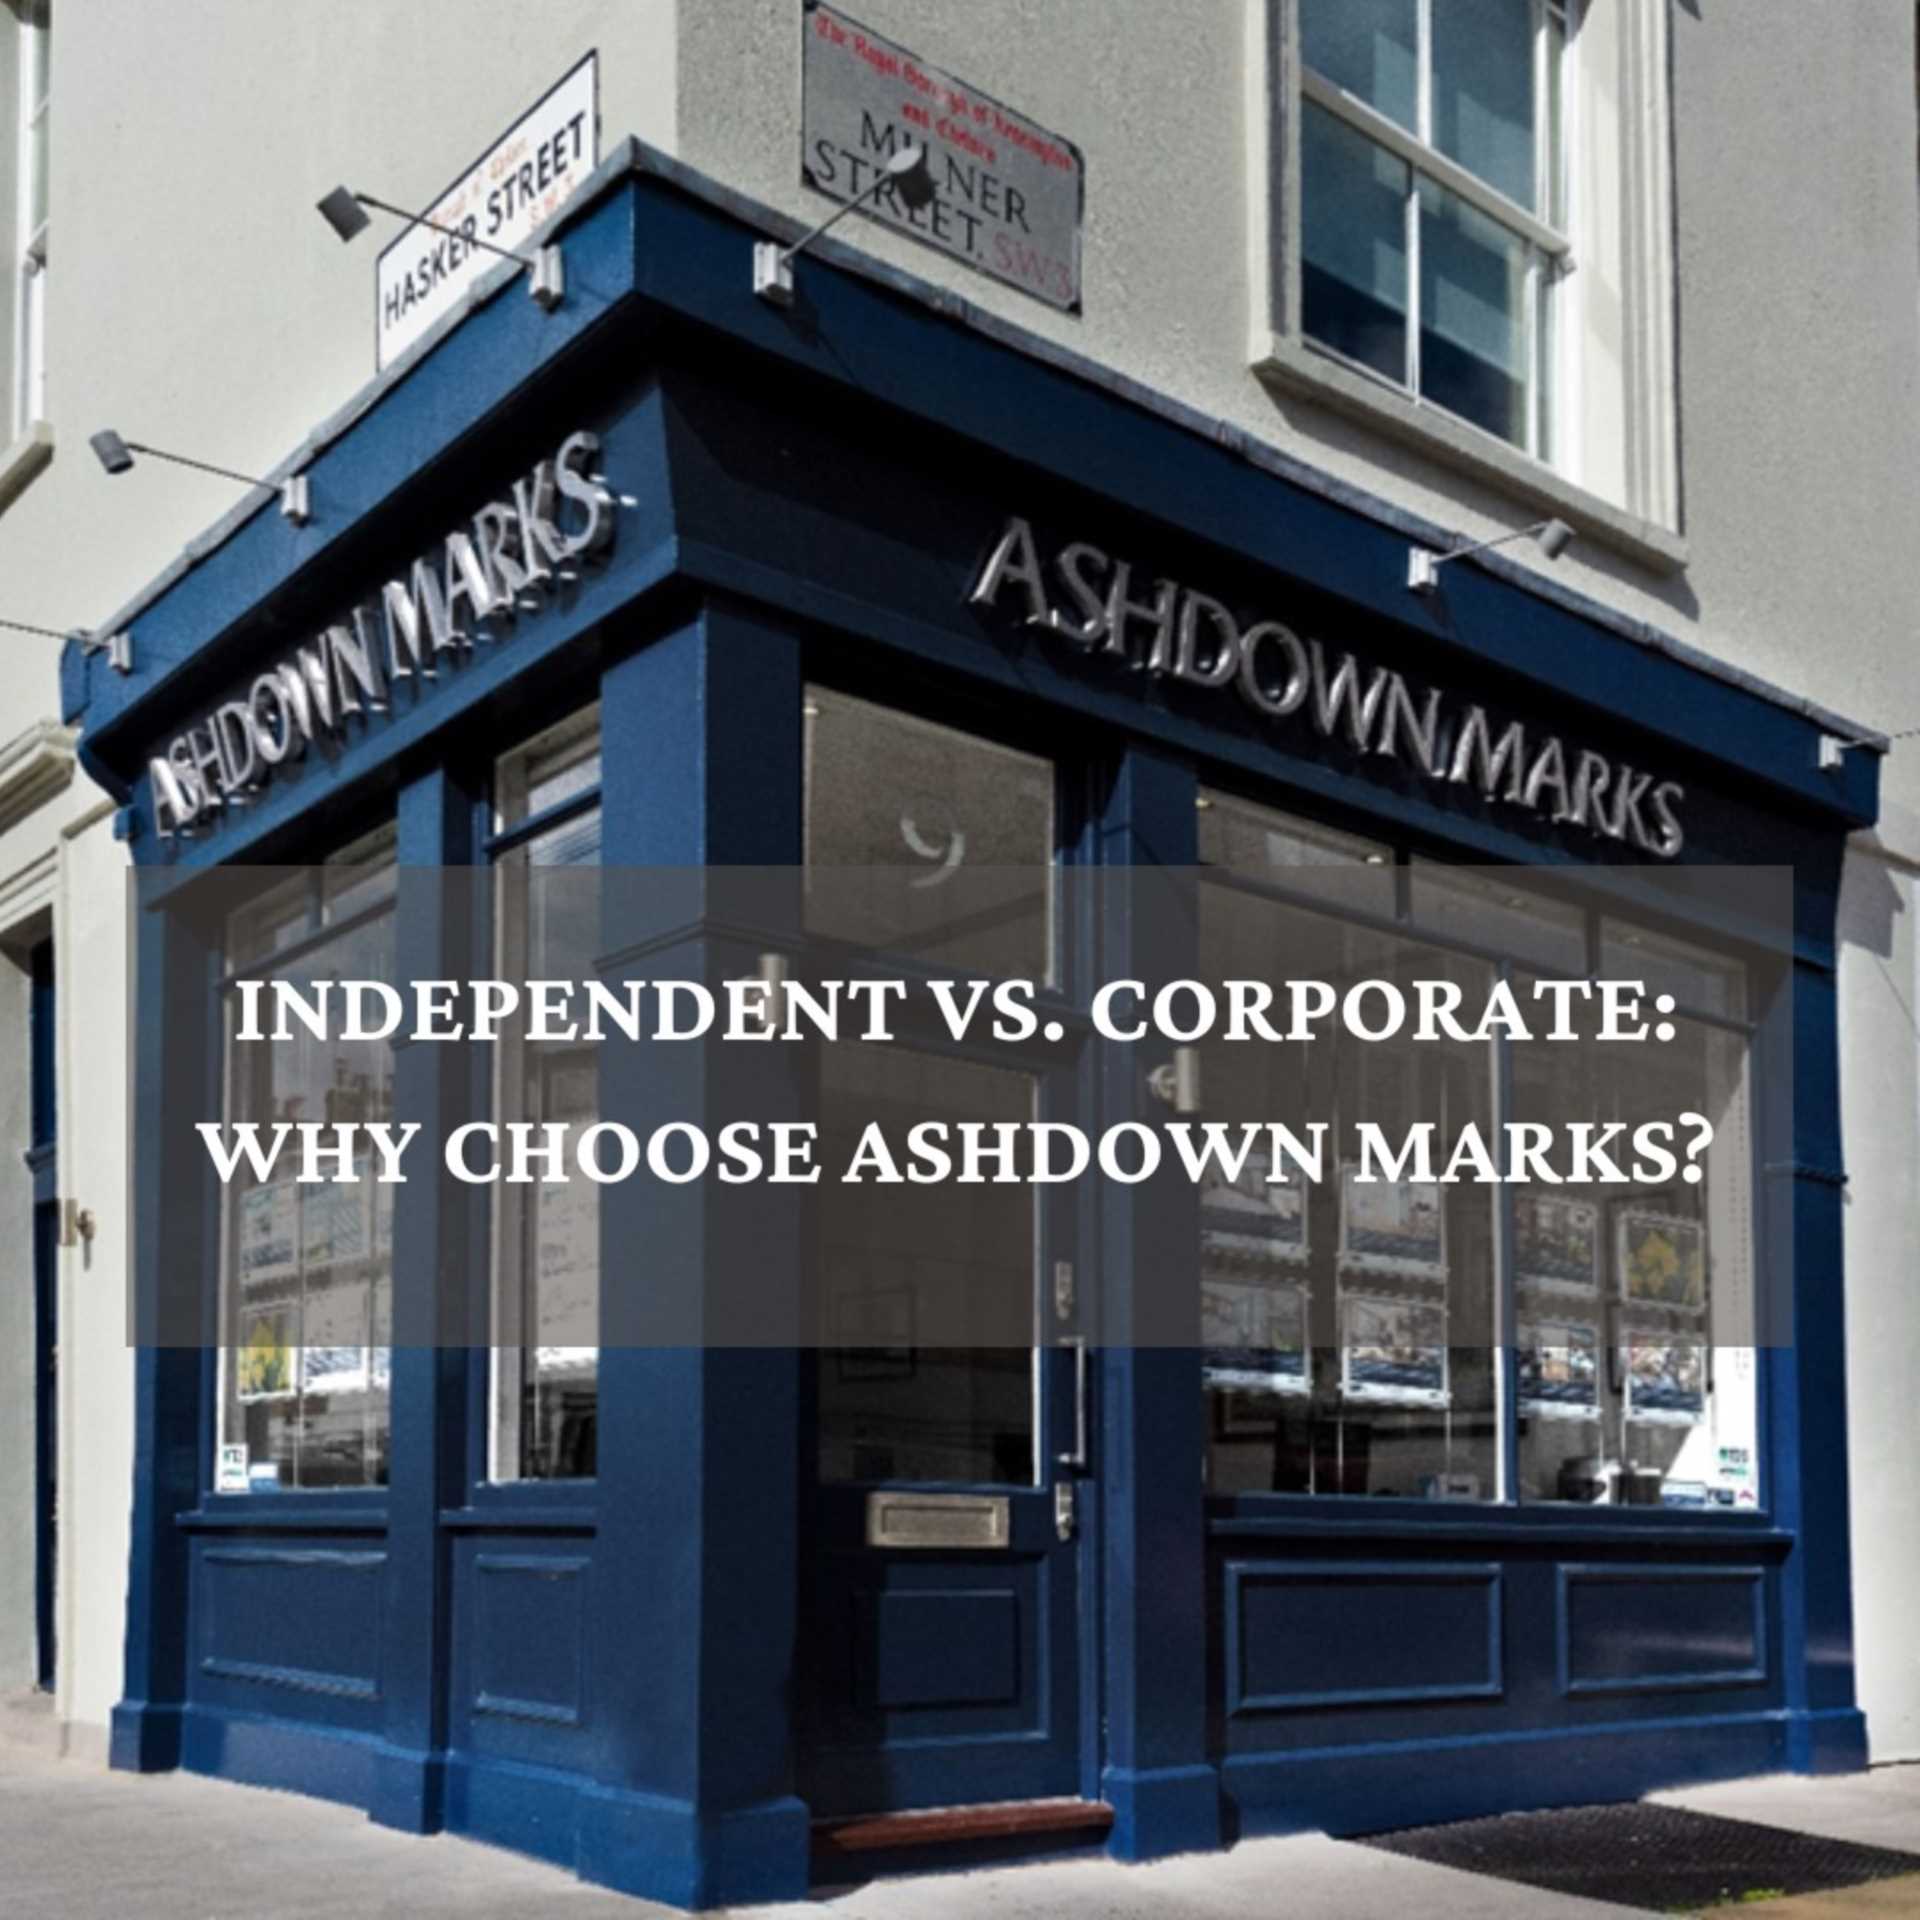 Independent vs. Corporate: Why Choose Ashdown Marks